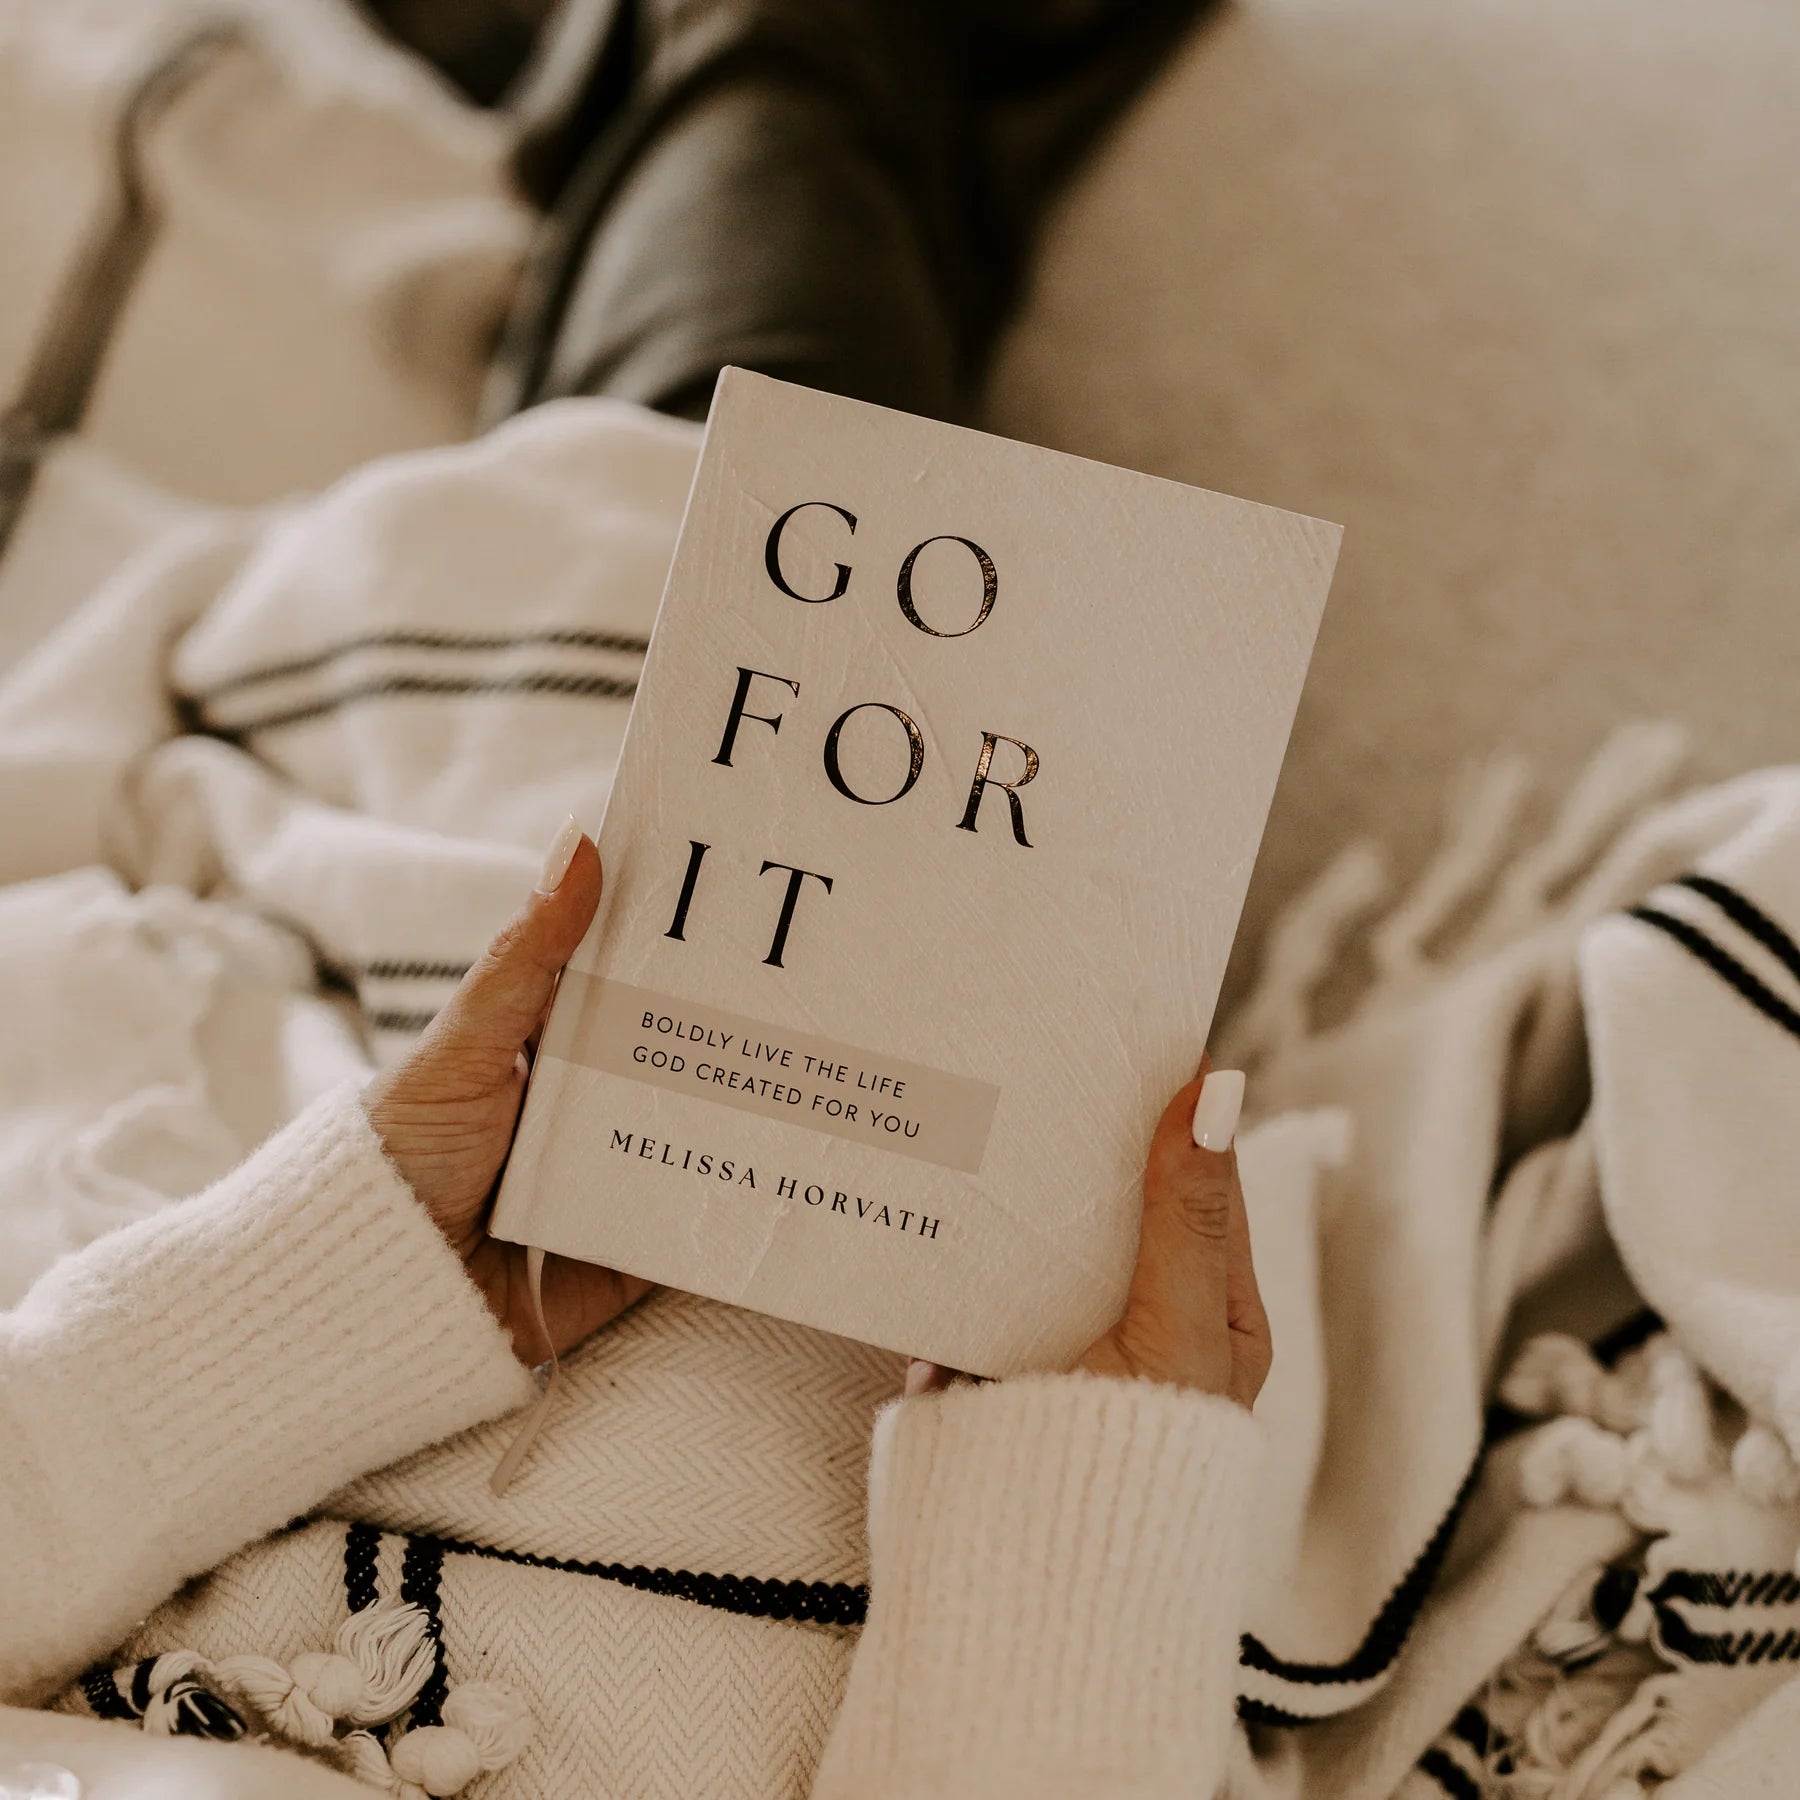 Go For It: 90 Devotions to Boldly Live the Life God Created For You